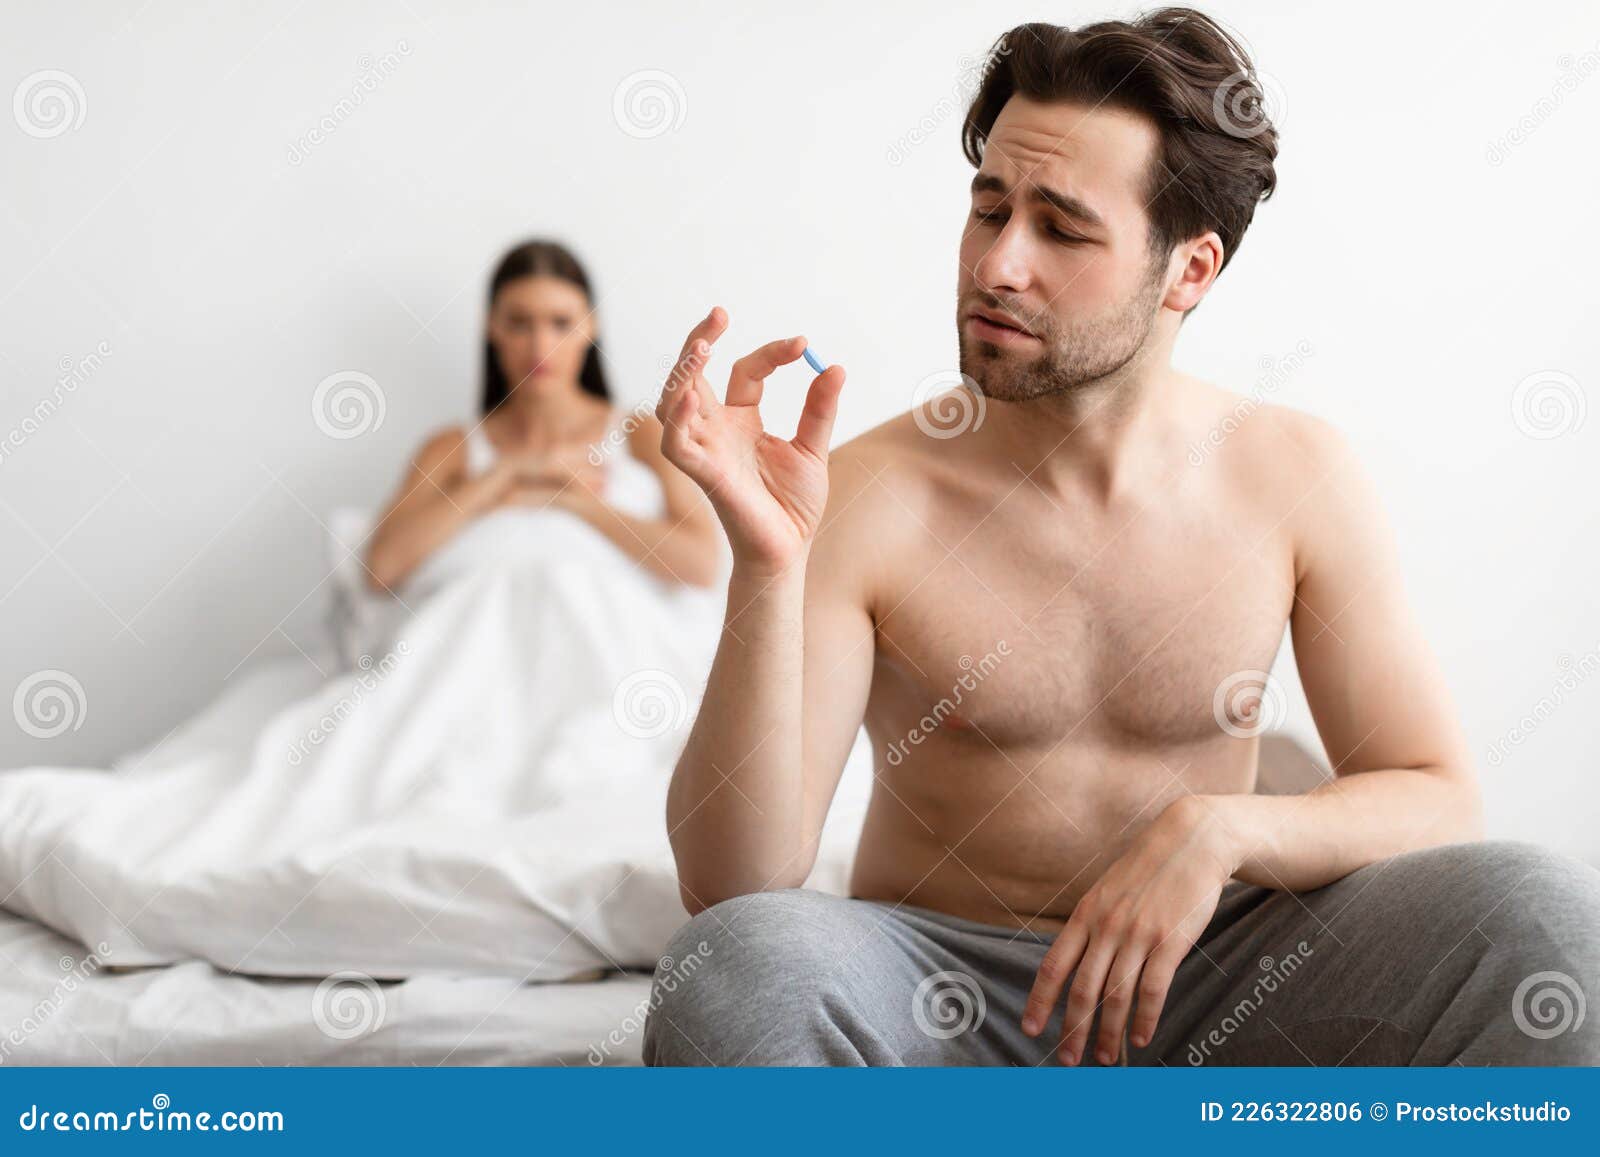 Young Husband Holding Potency Pill before Sex Indoors Stock Photo